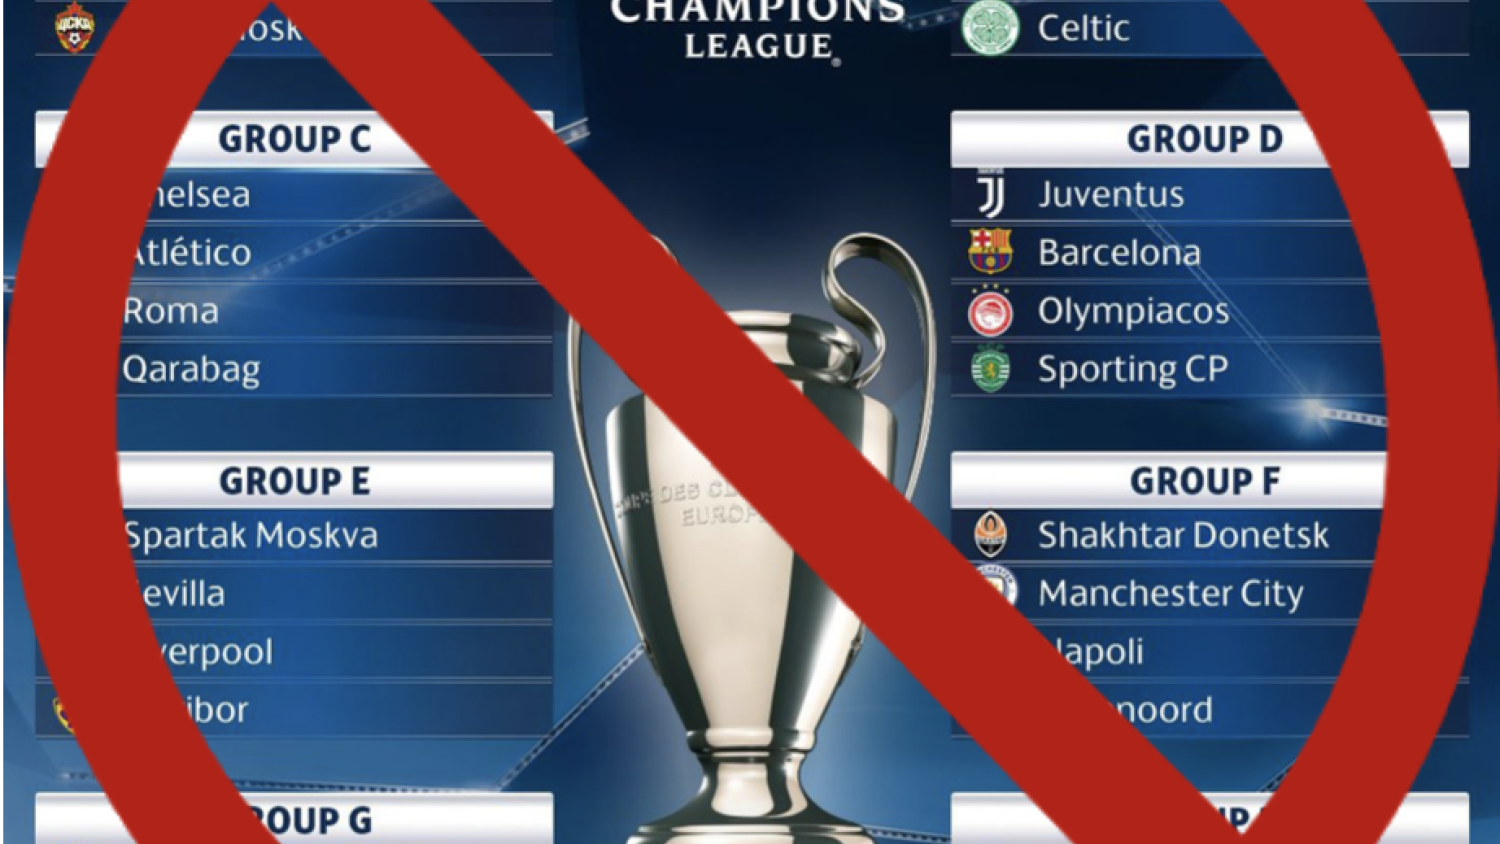 UEFA Champions League on X: These clubs have history 📖 Who will